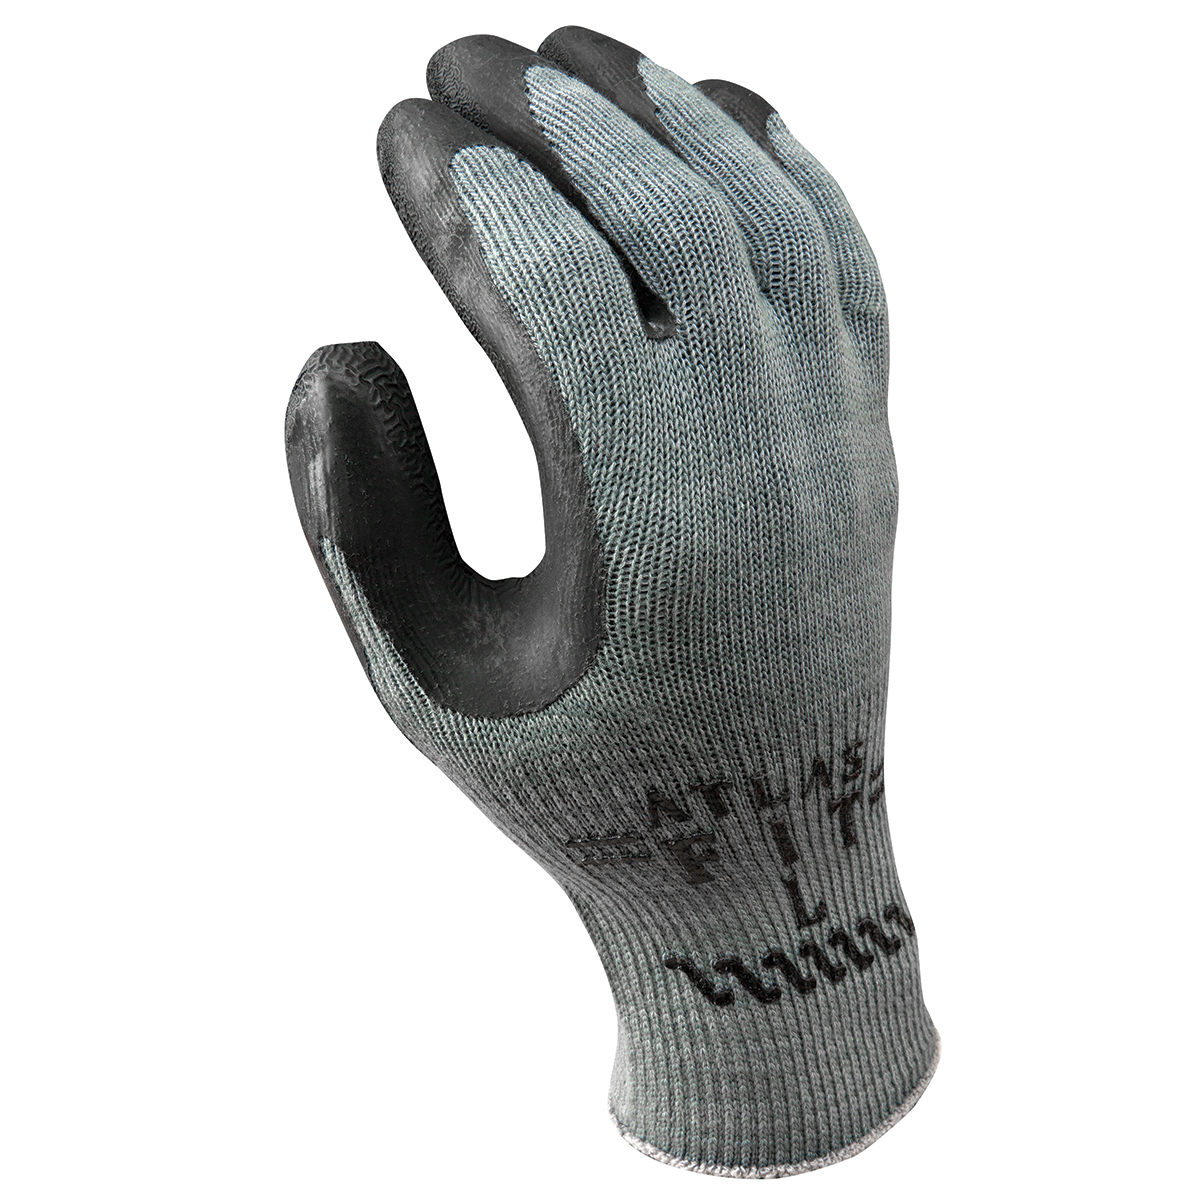 Aluminized Thermal Gloves - 11 Oz. OPF-Carbon Blend, 17 In. – X1